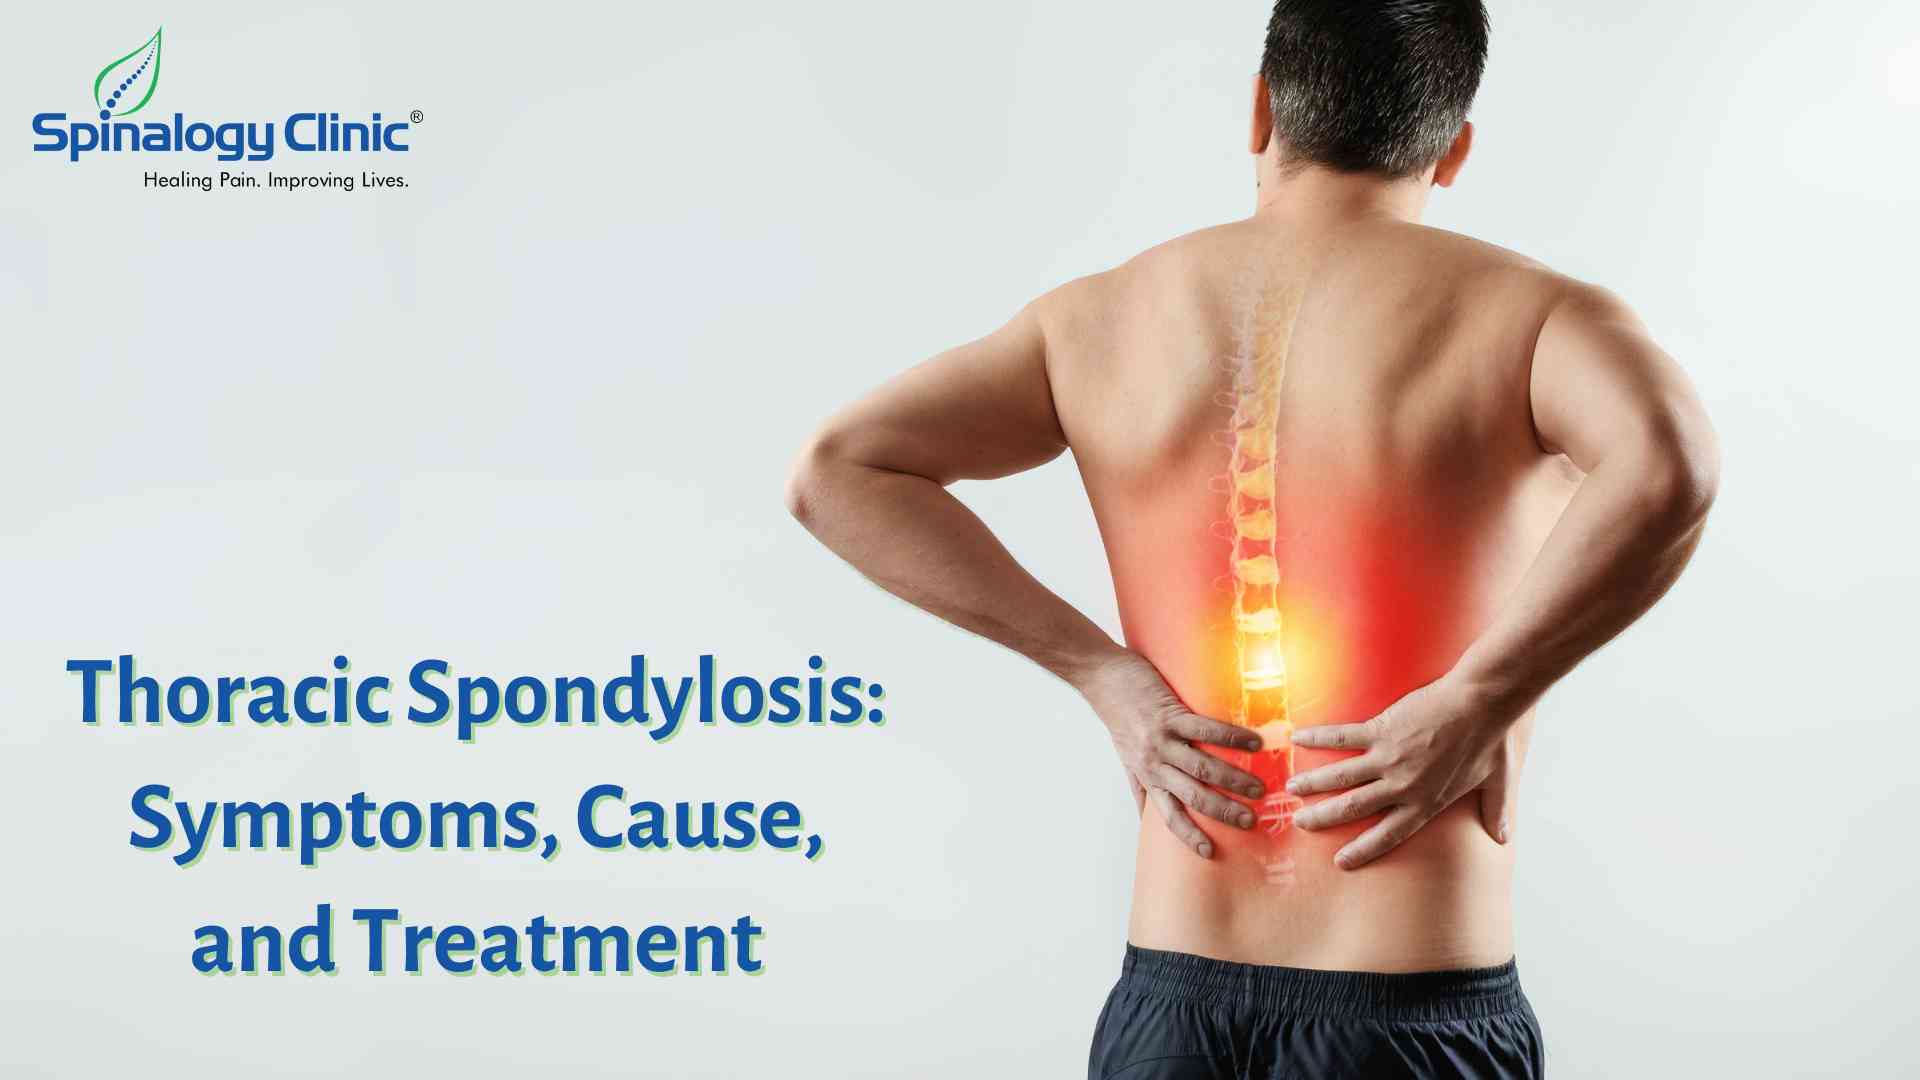 Thoracic Spondylosis: Symptoms, Cause, and Treatment